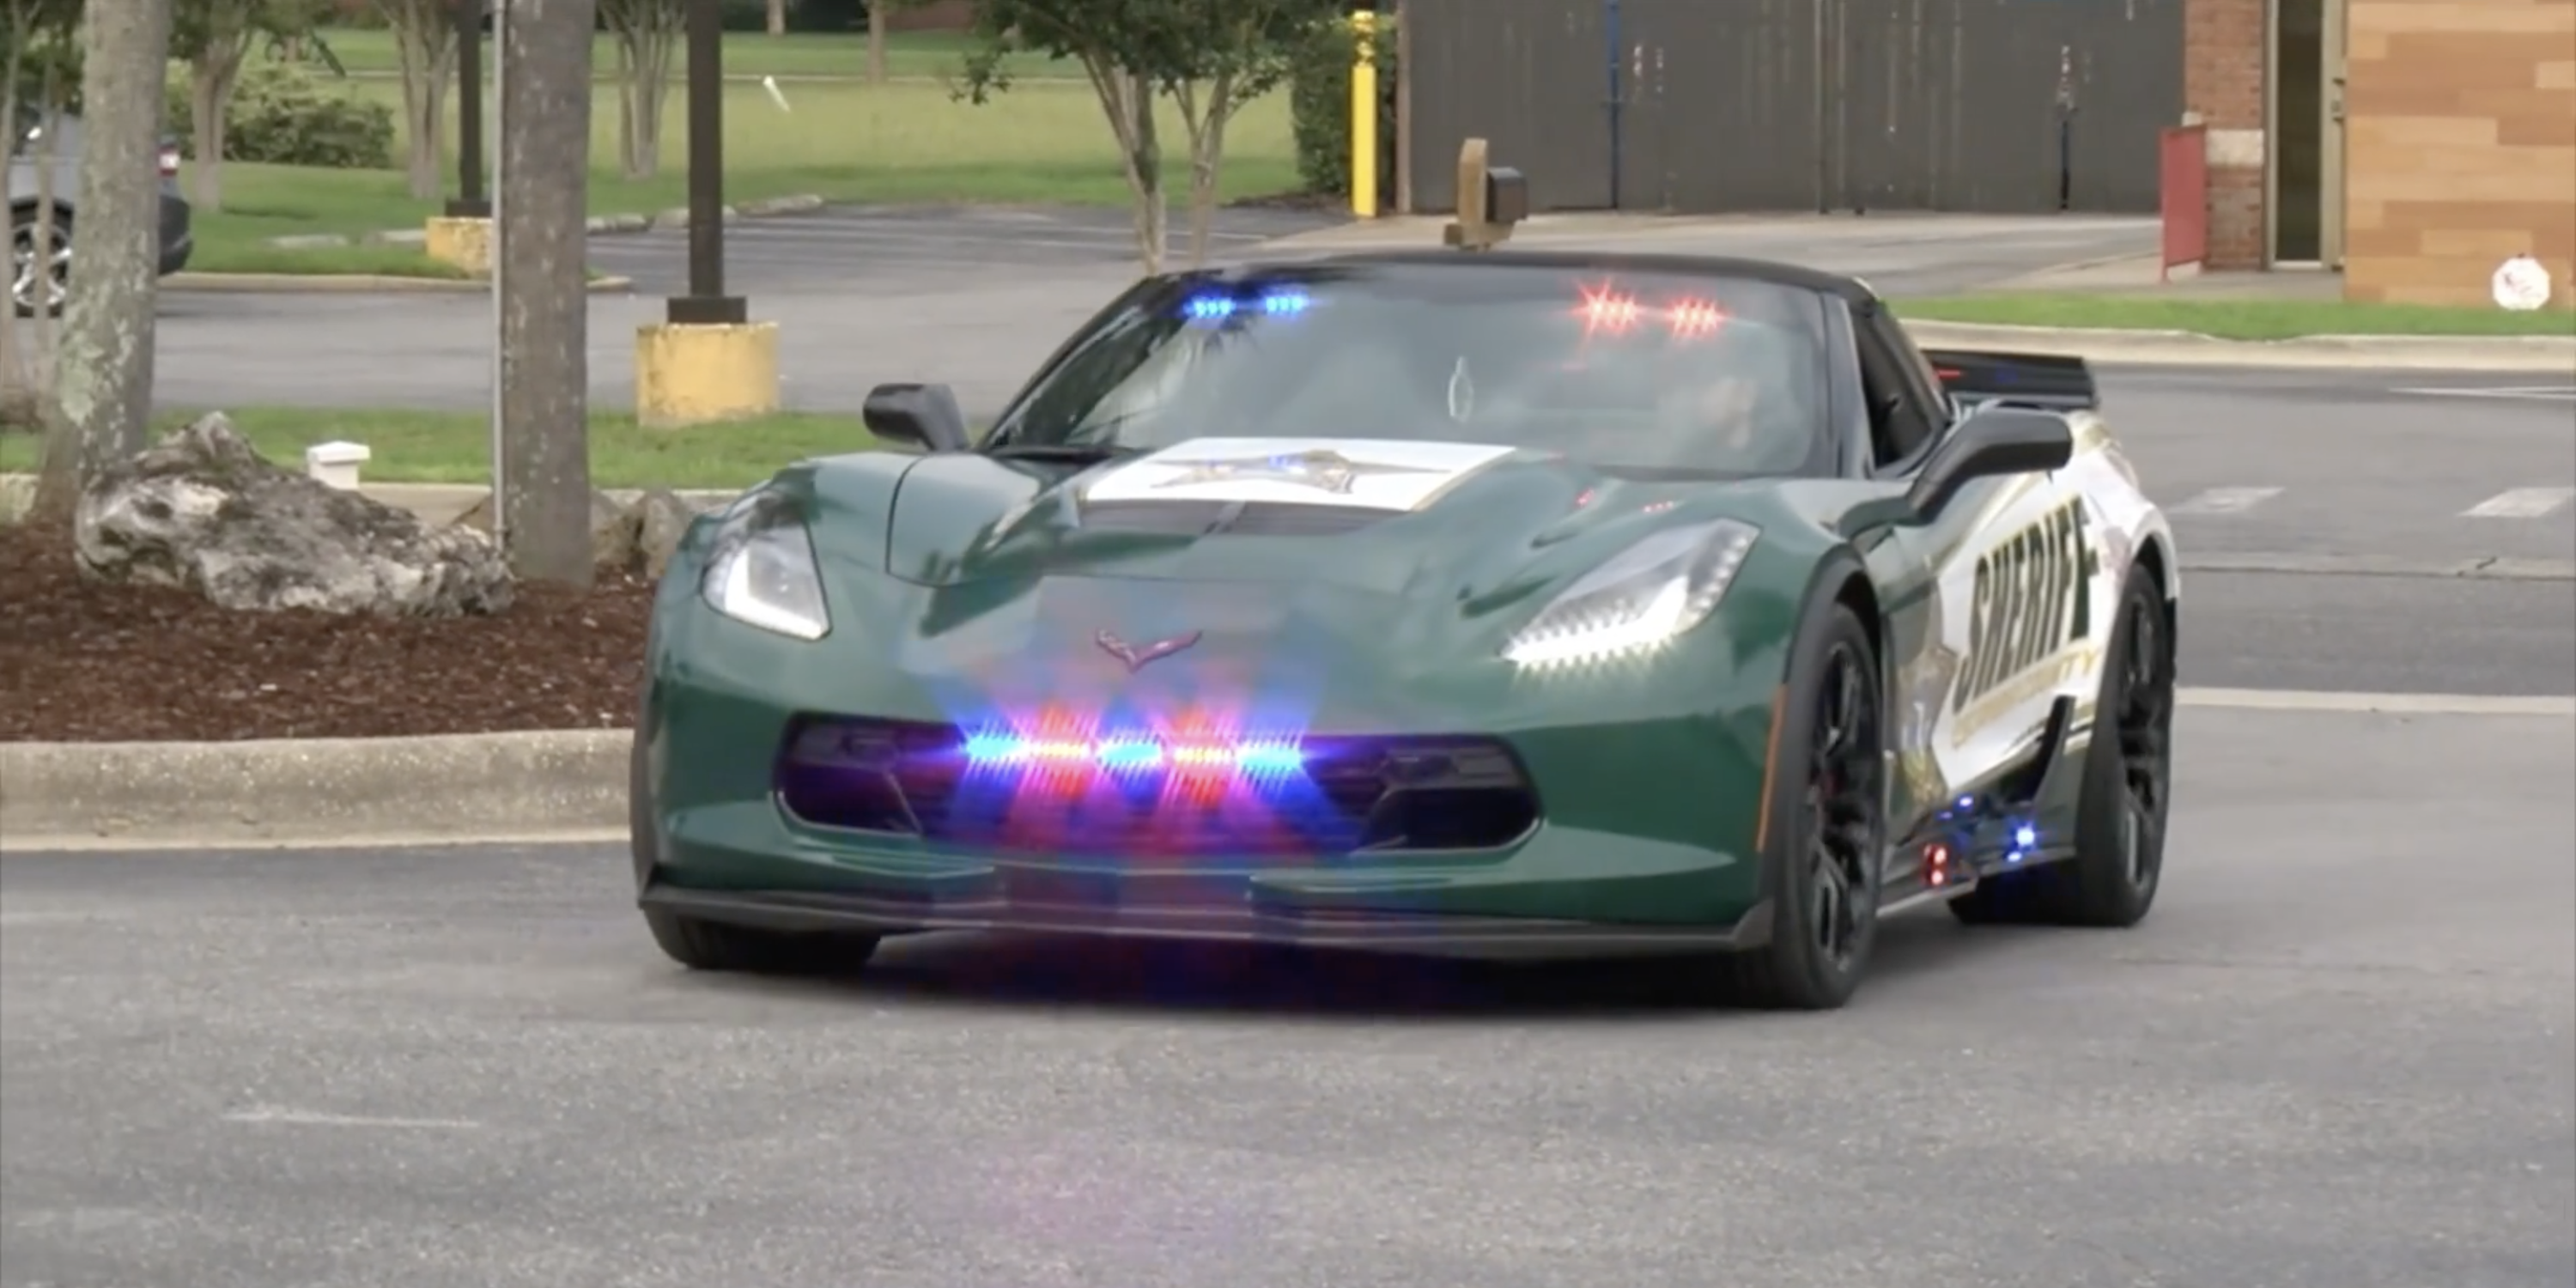 Florida Sheriff's Office Adds Seized C7 Corvette Z06 to Its Fleet